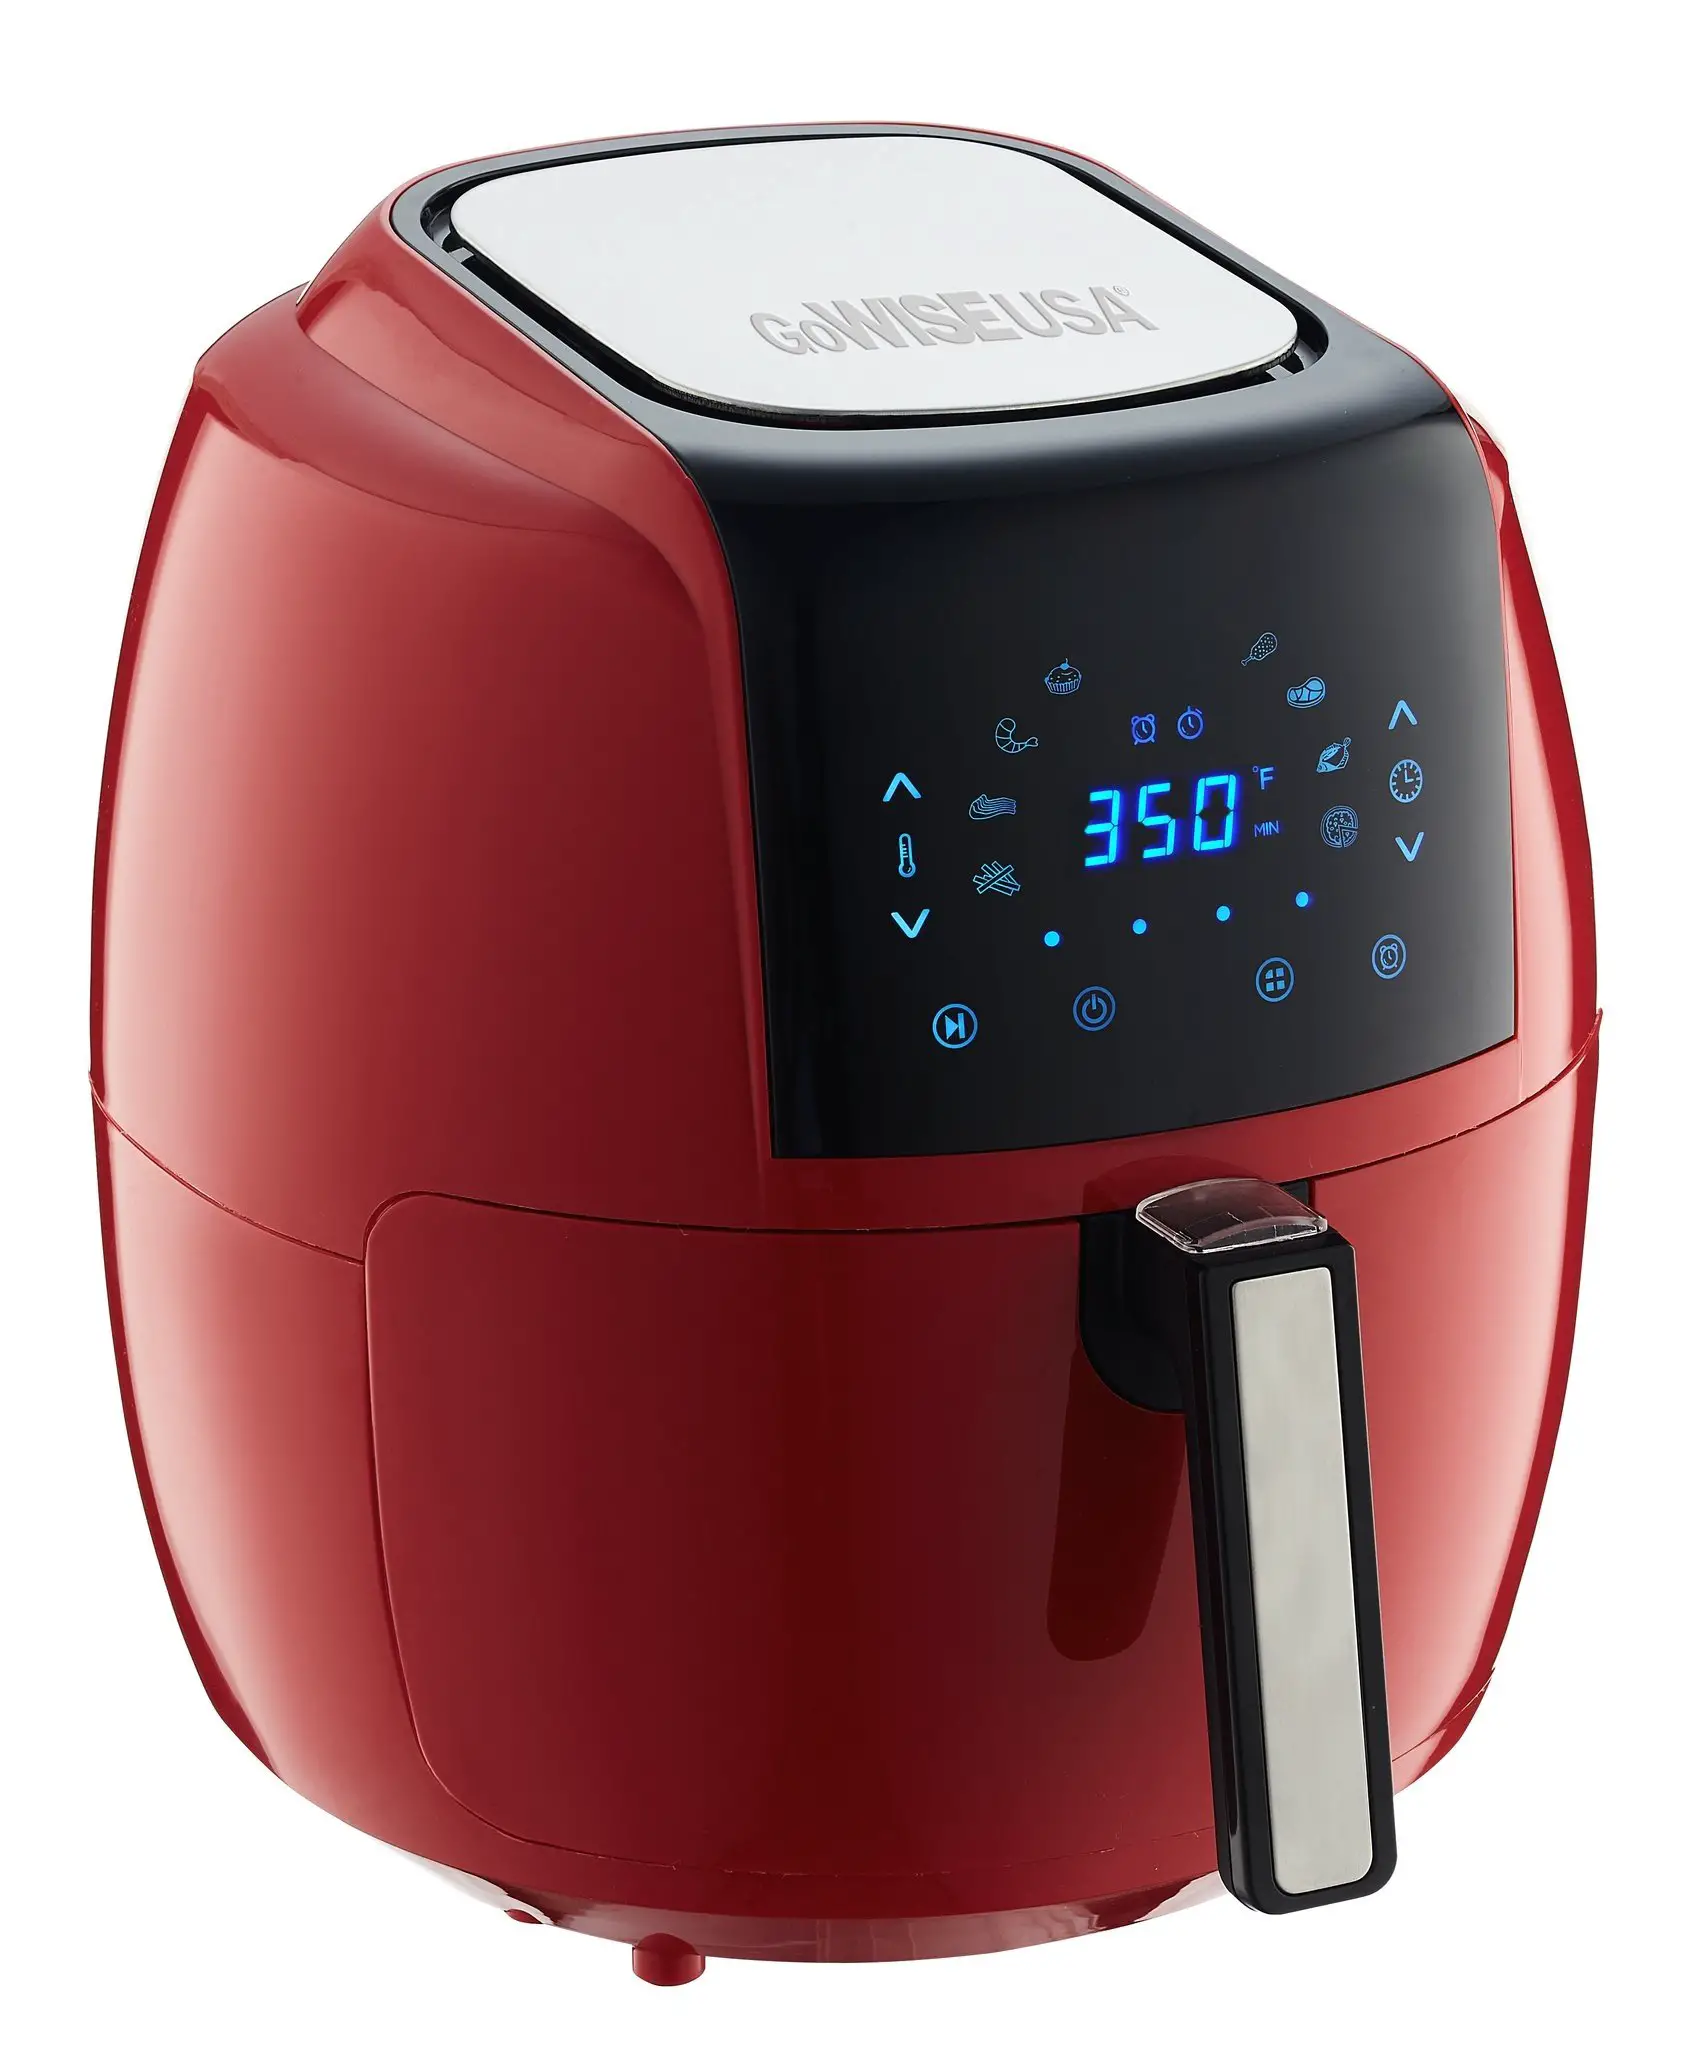 Gowise Usa Air Fryer 5.8 Qt Manual